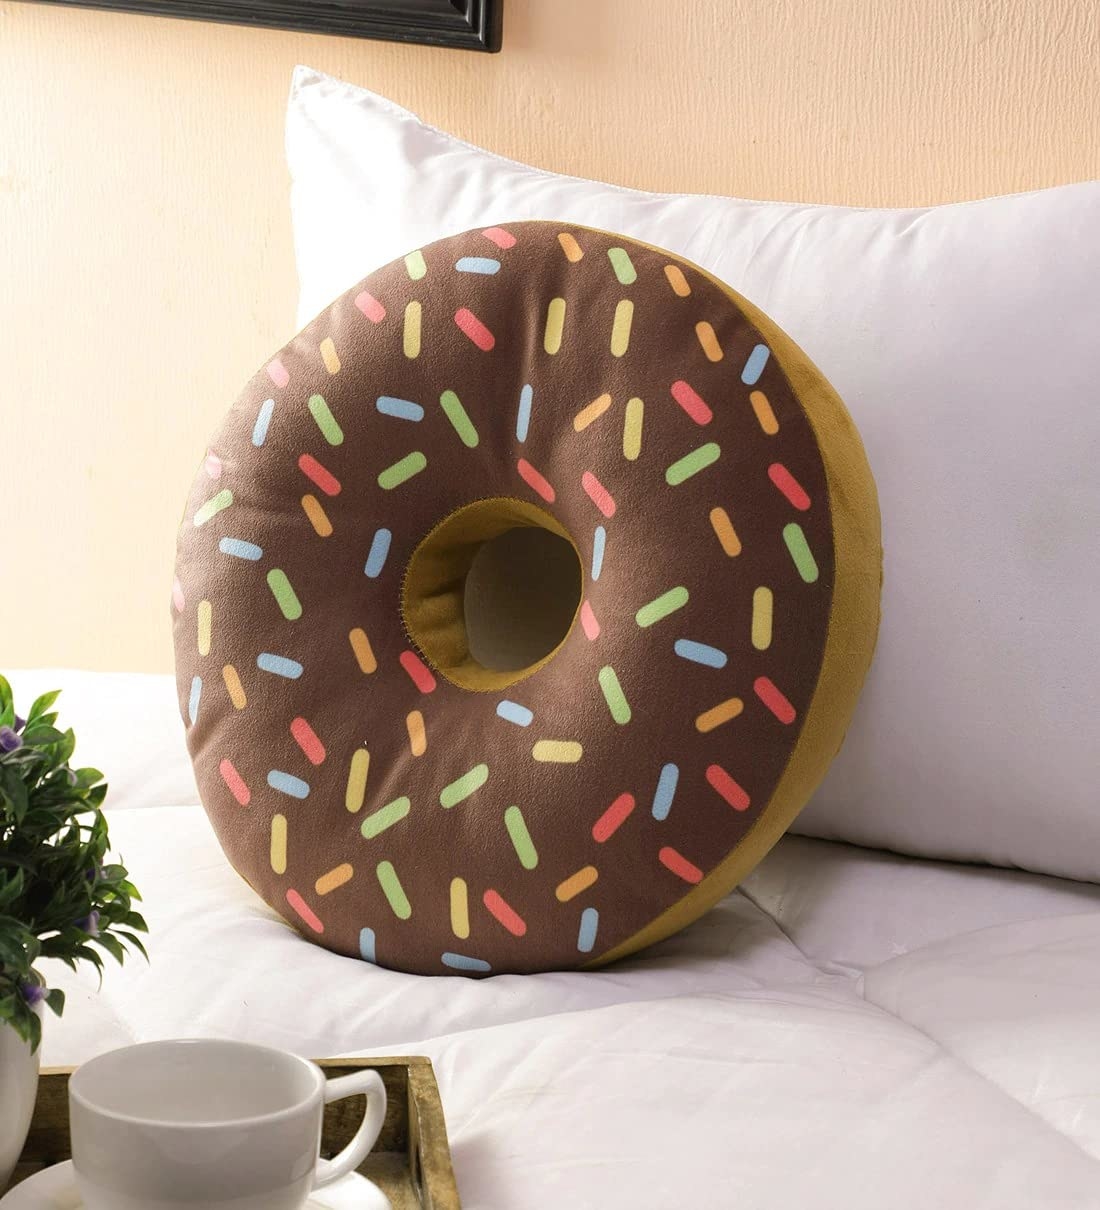 The pillow is designed to look like a chocolate frosted donut with sprinkles on top